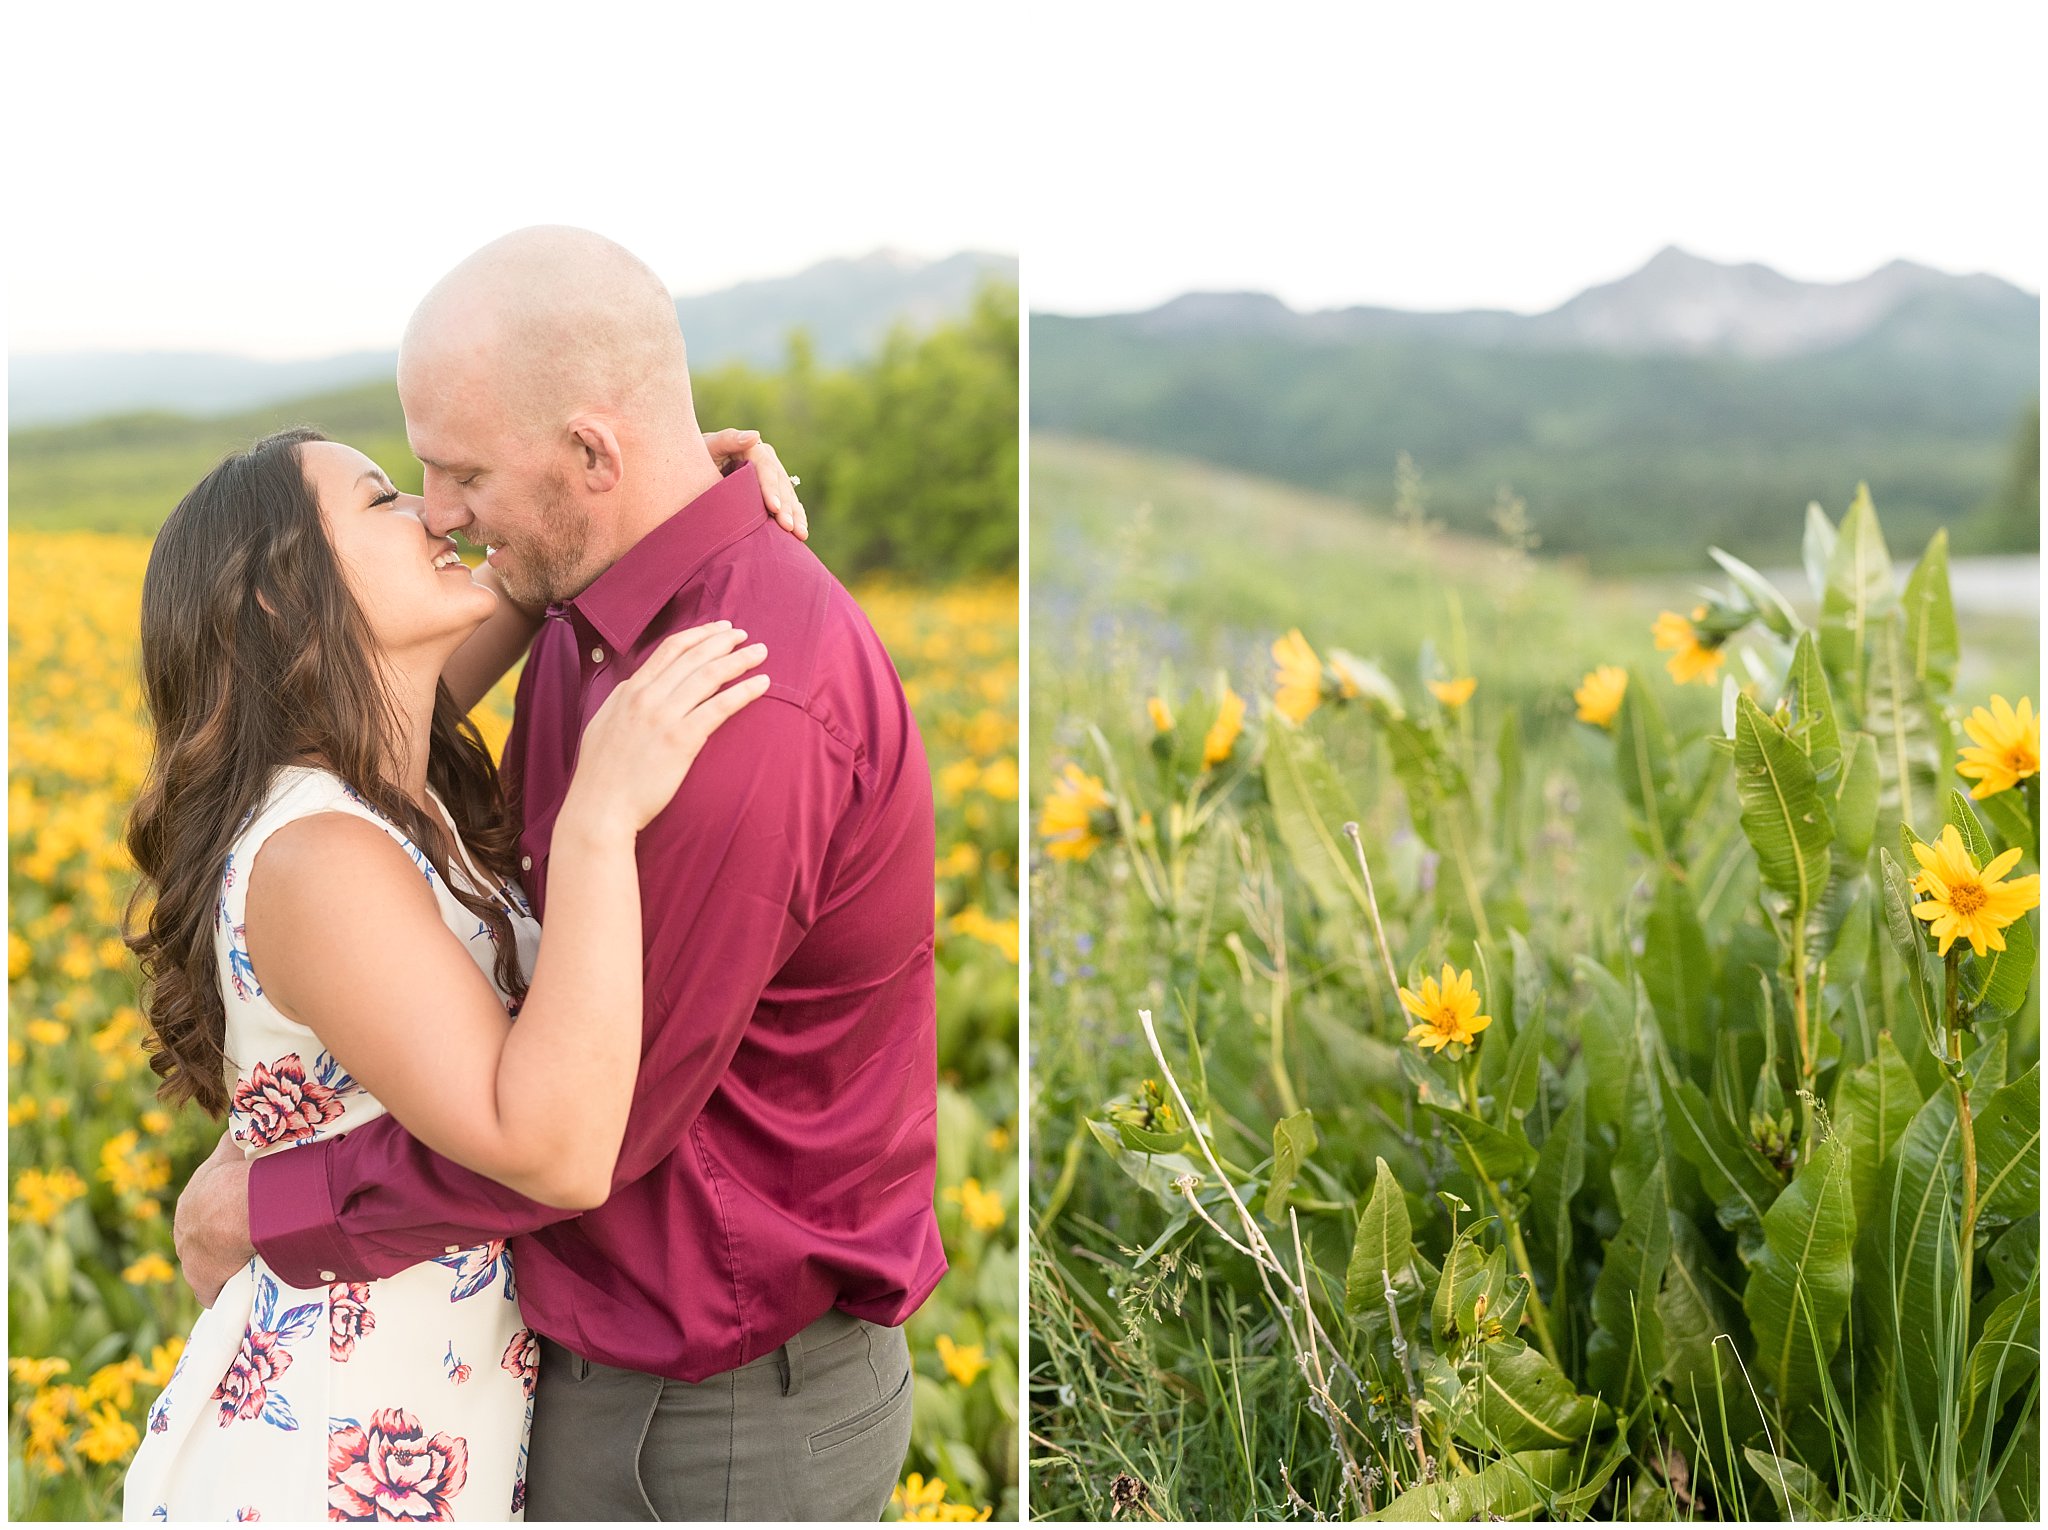 Couple engagement session in the mountains with wildflowers | Snowbasin Utah Engagements